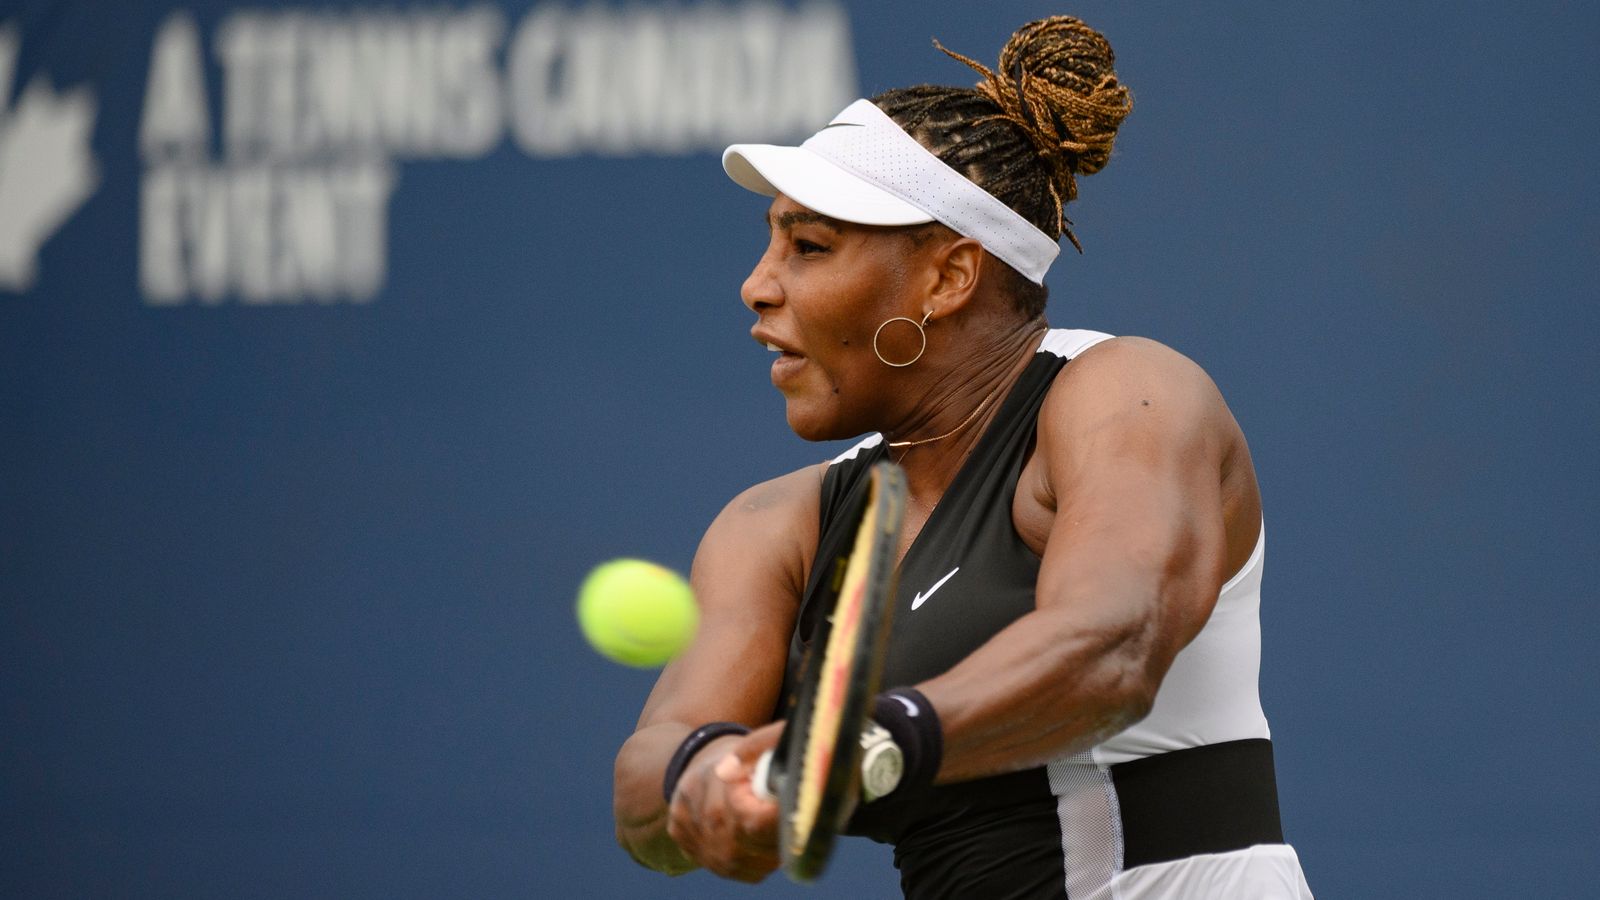 Serena Williams takes first singles win for over a year at Nations Bank Open in Toronto